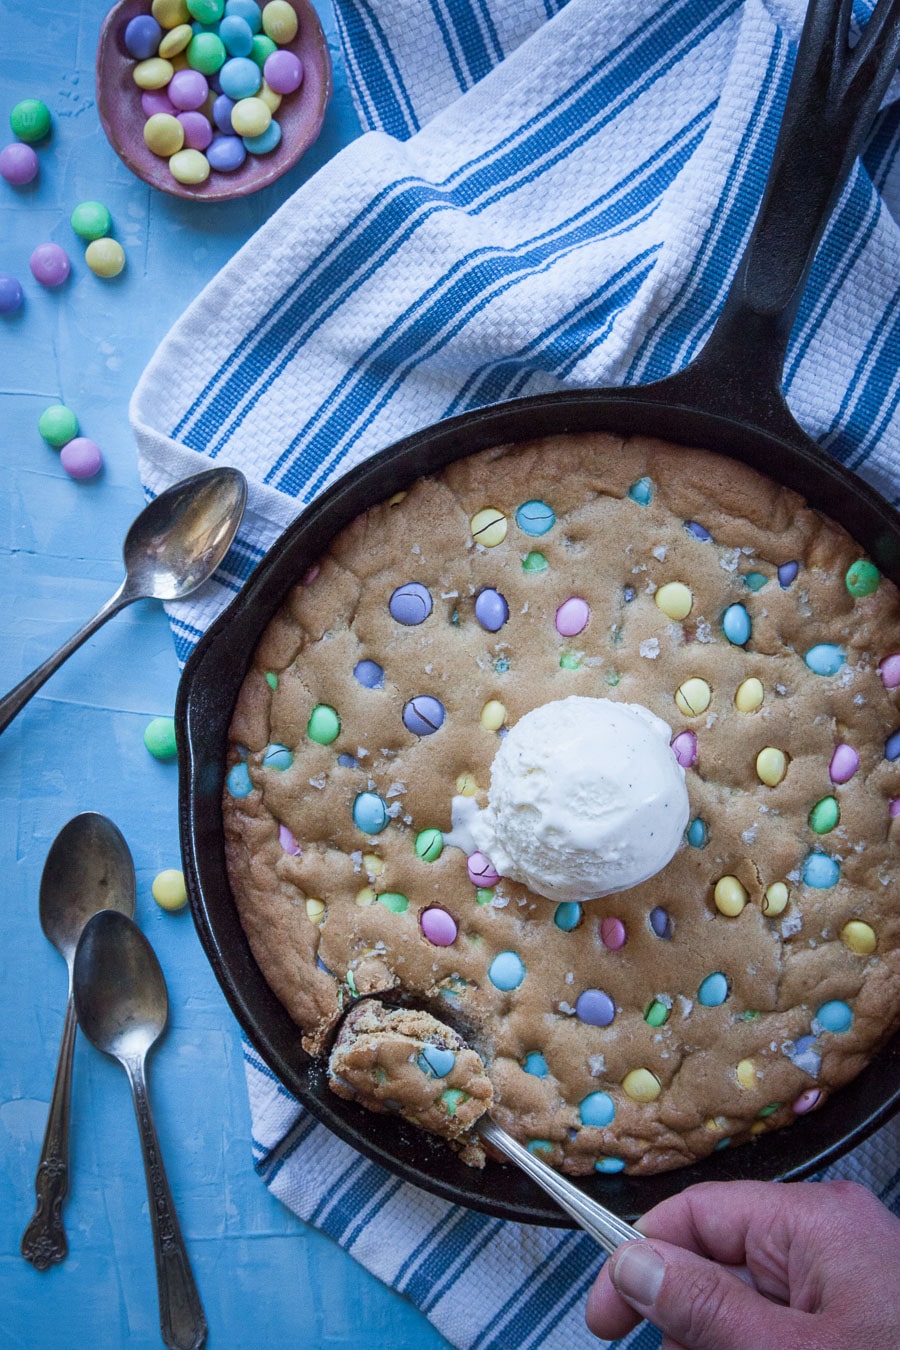 Easy-to-make Giant Skillet Cookie with M&M candies Recipe and photo by Irvin Lin